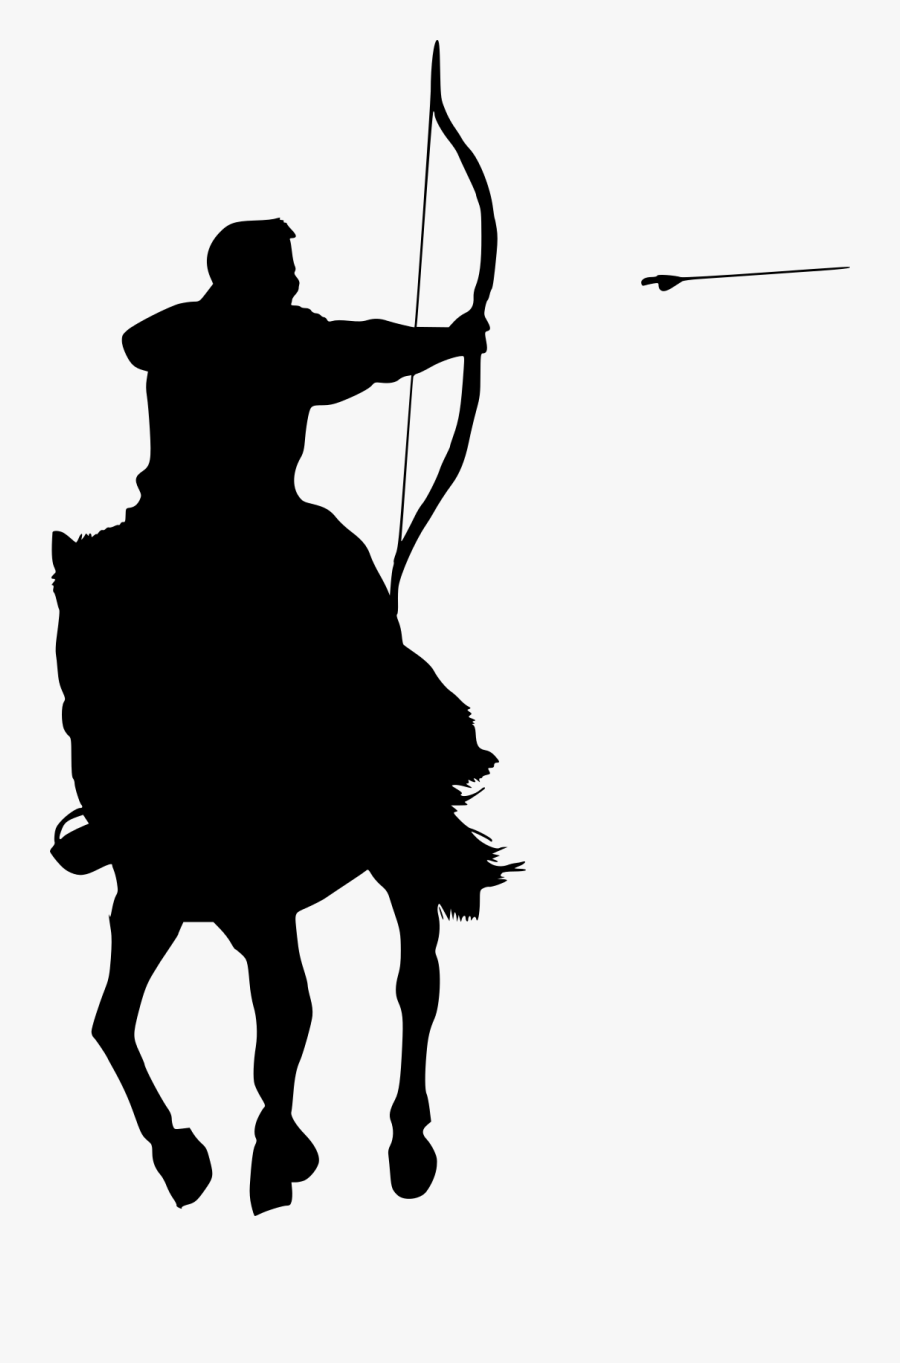 Woman Archer Silhouette At Getdrawings - Horse Archer Png, Transparent Clipart